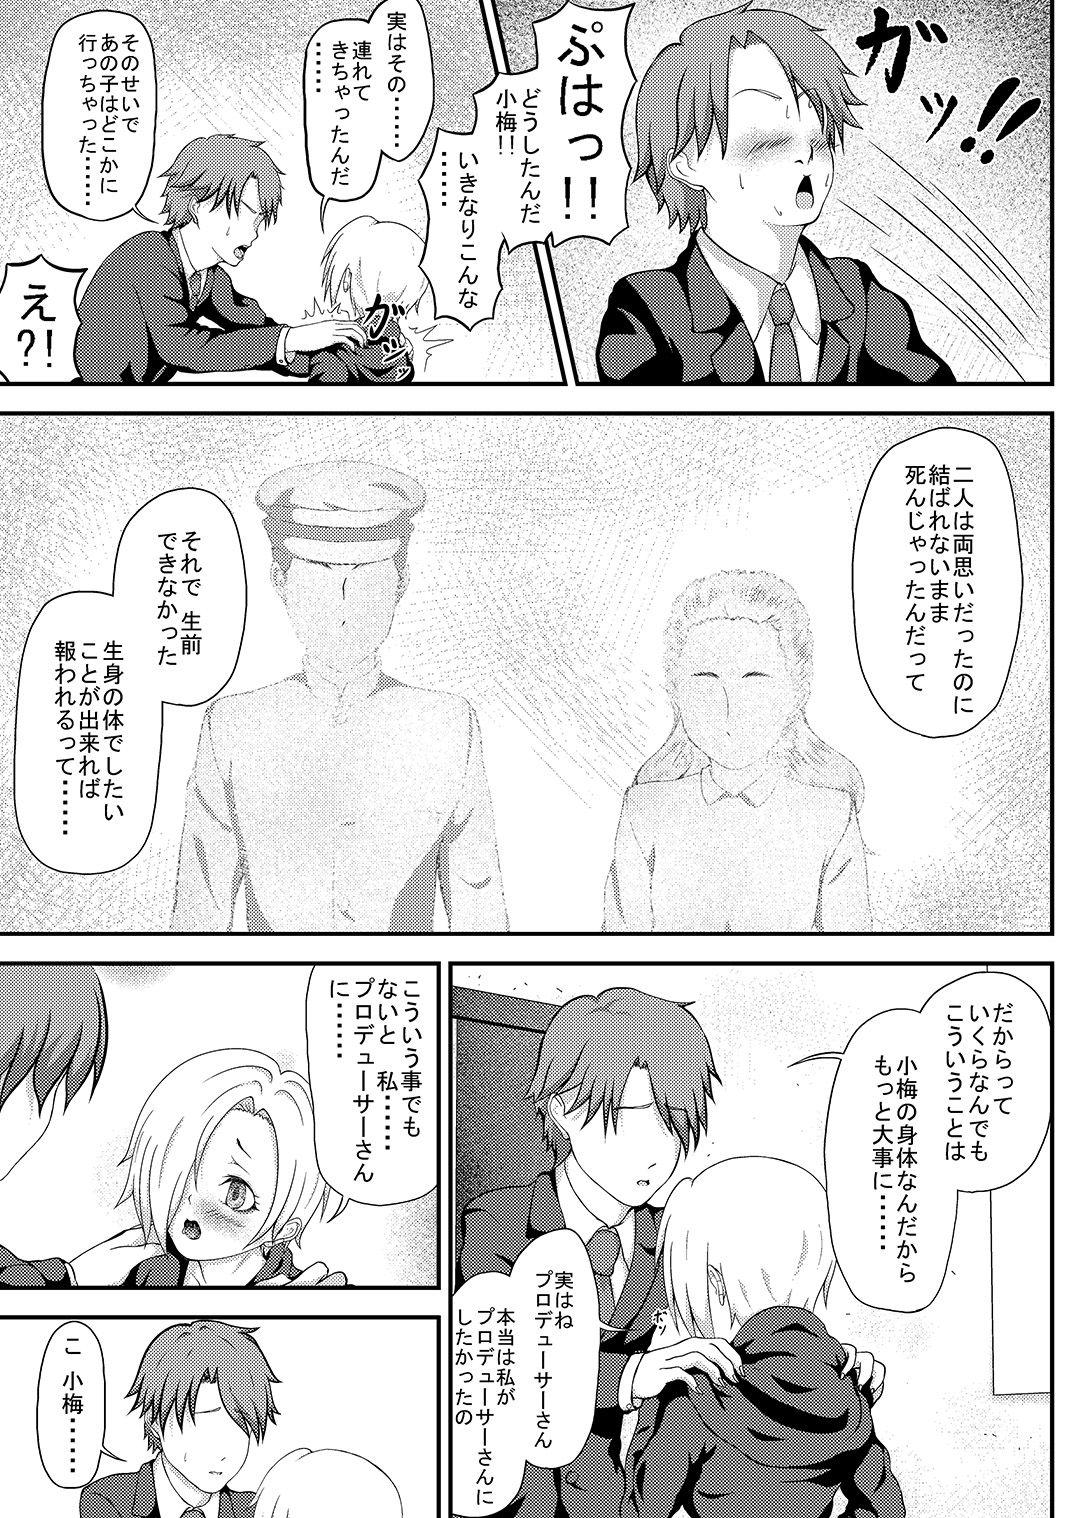 Oral Sex The H-aunting of Koume-chan - The idolmaster Realsex - Page 5